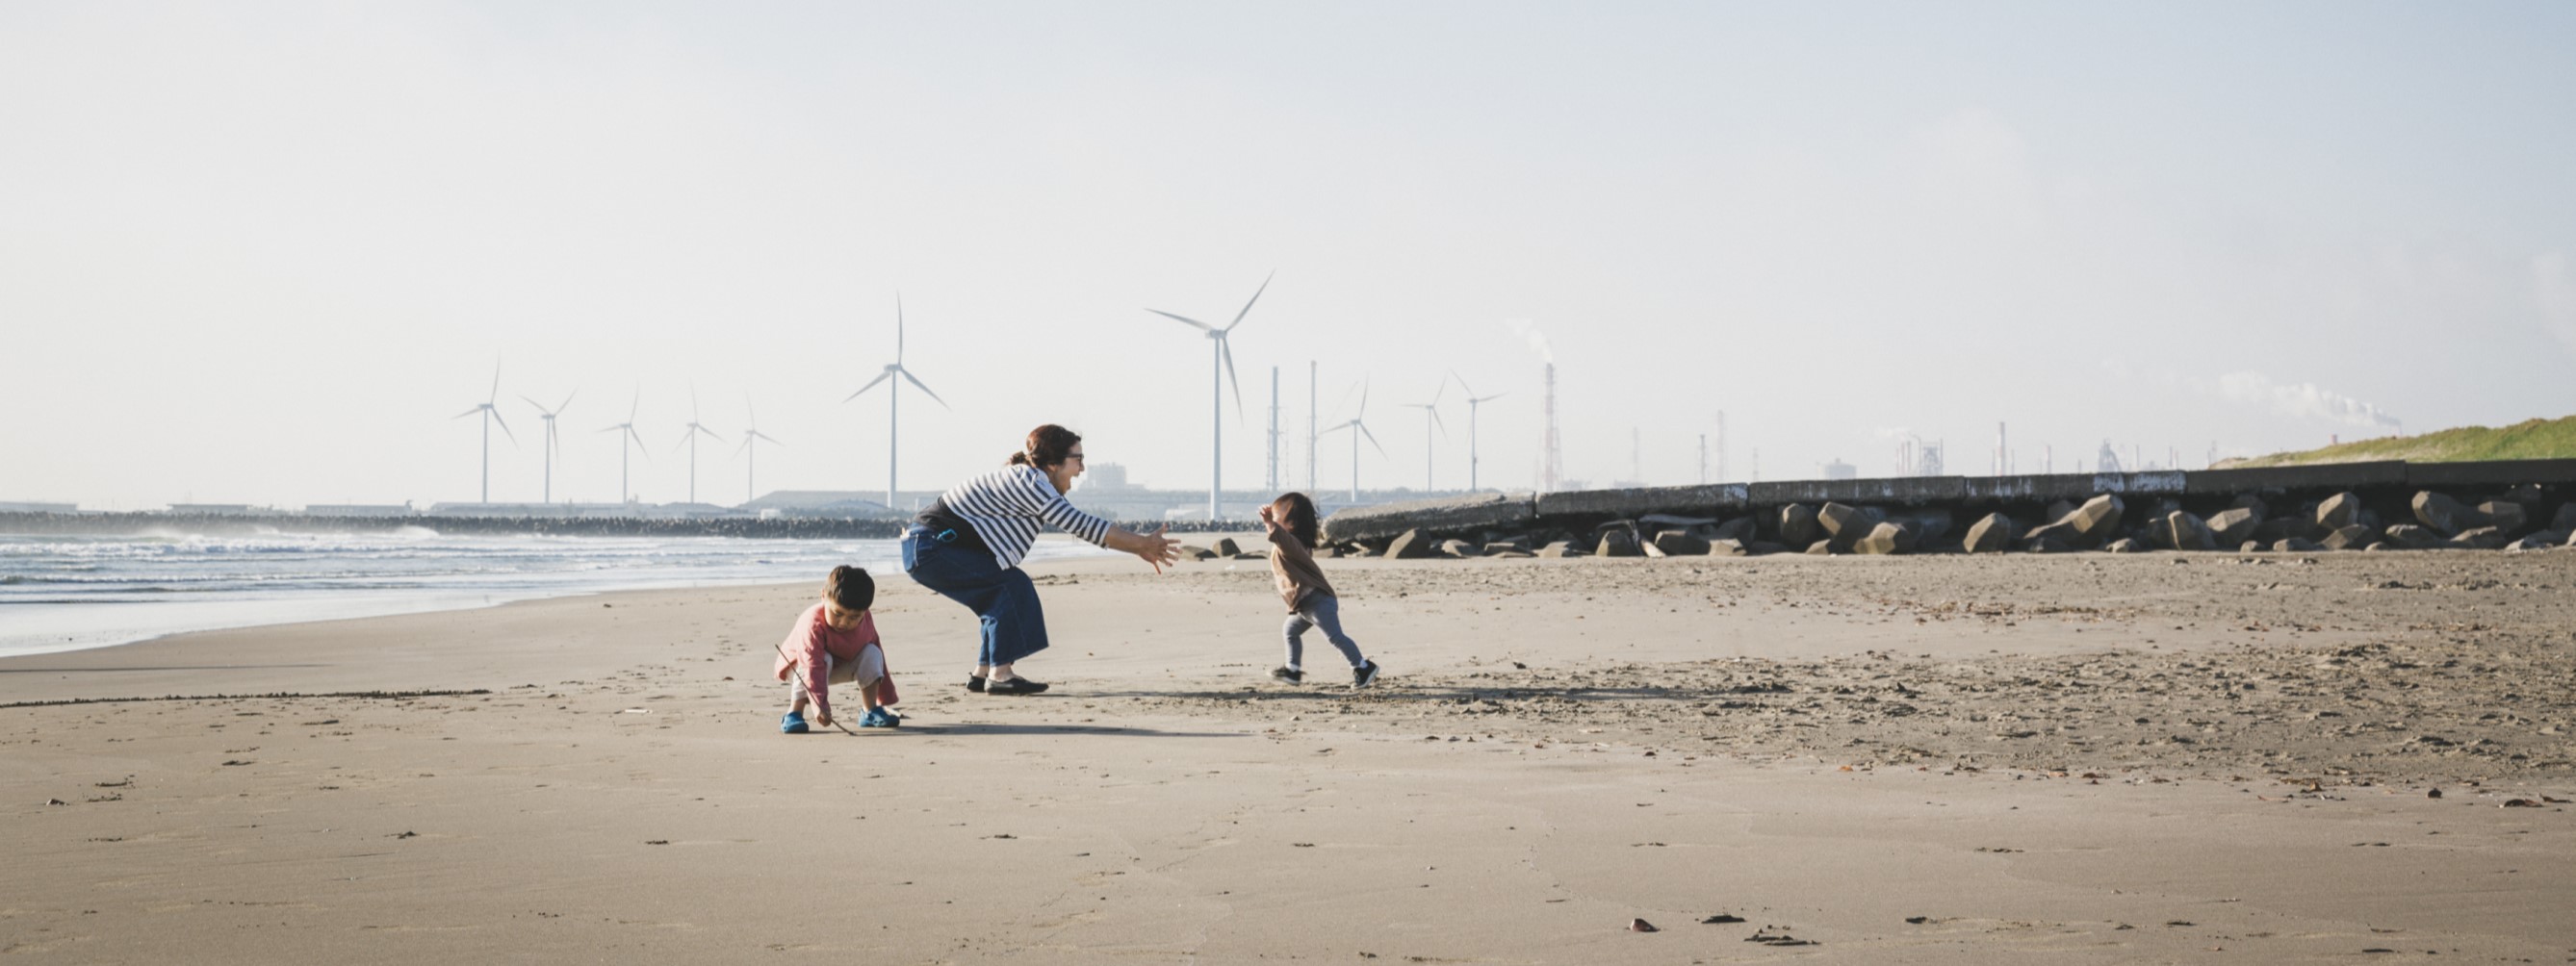 A family playing on a beach with wind turbines in the background